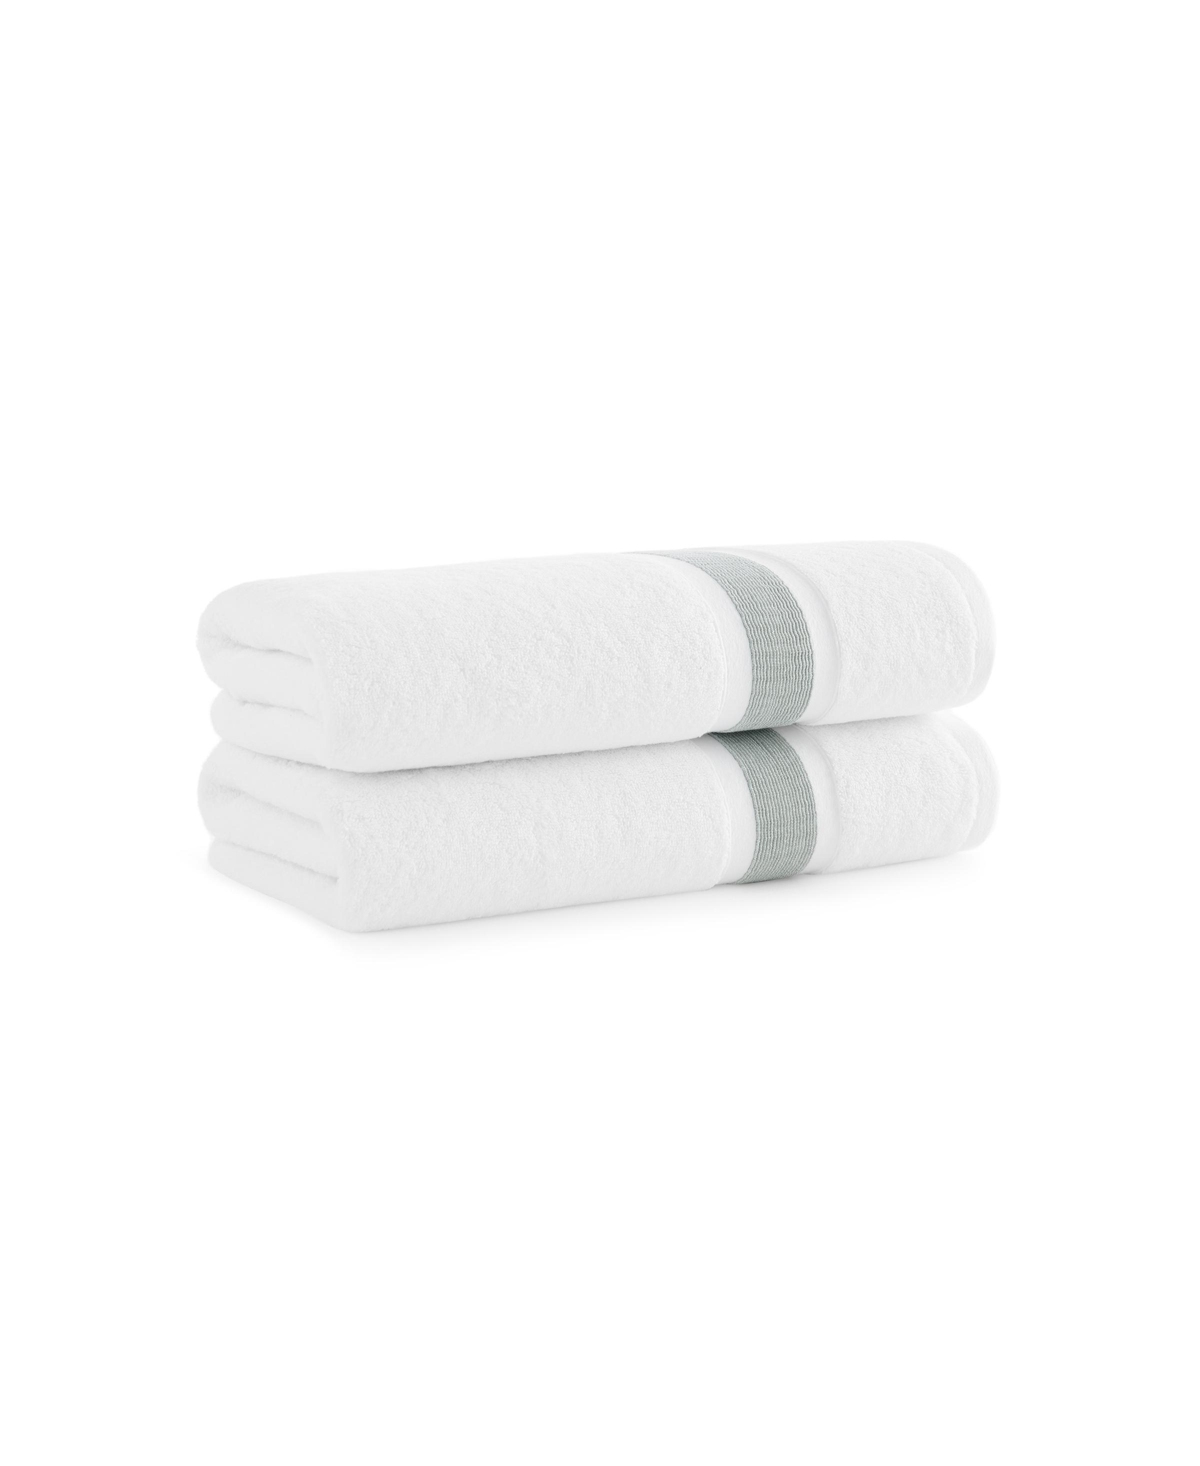 ASTON AND ARDEN AEGEAN ECO-FRIENDLY RECYCLED TURKISH BATH TOWELS (2 PACK), 30X60, 600 GSM, WHITE WITH WEFT WOVEN STR